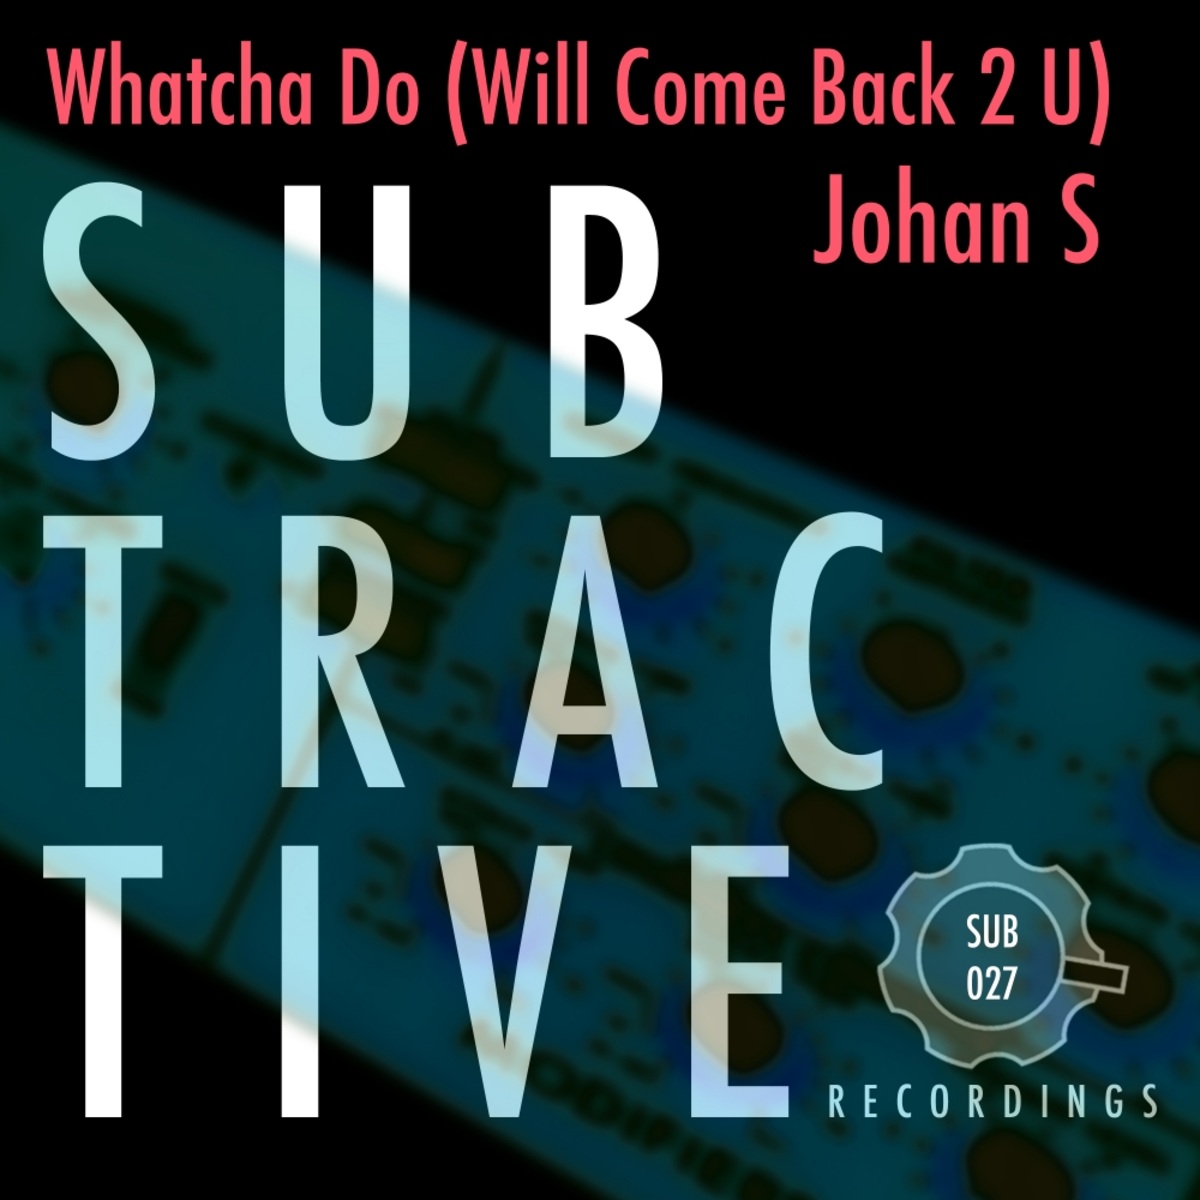 Johan S - Whatcha Do (Will Come Back 2 U) / Subtractive Recordings